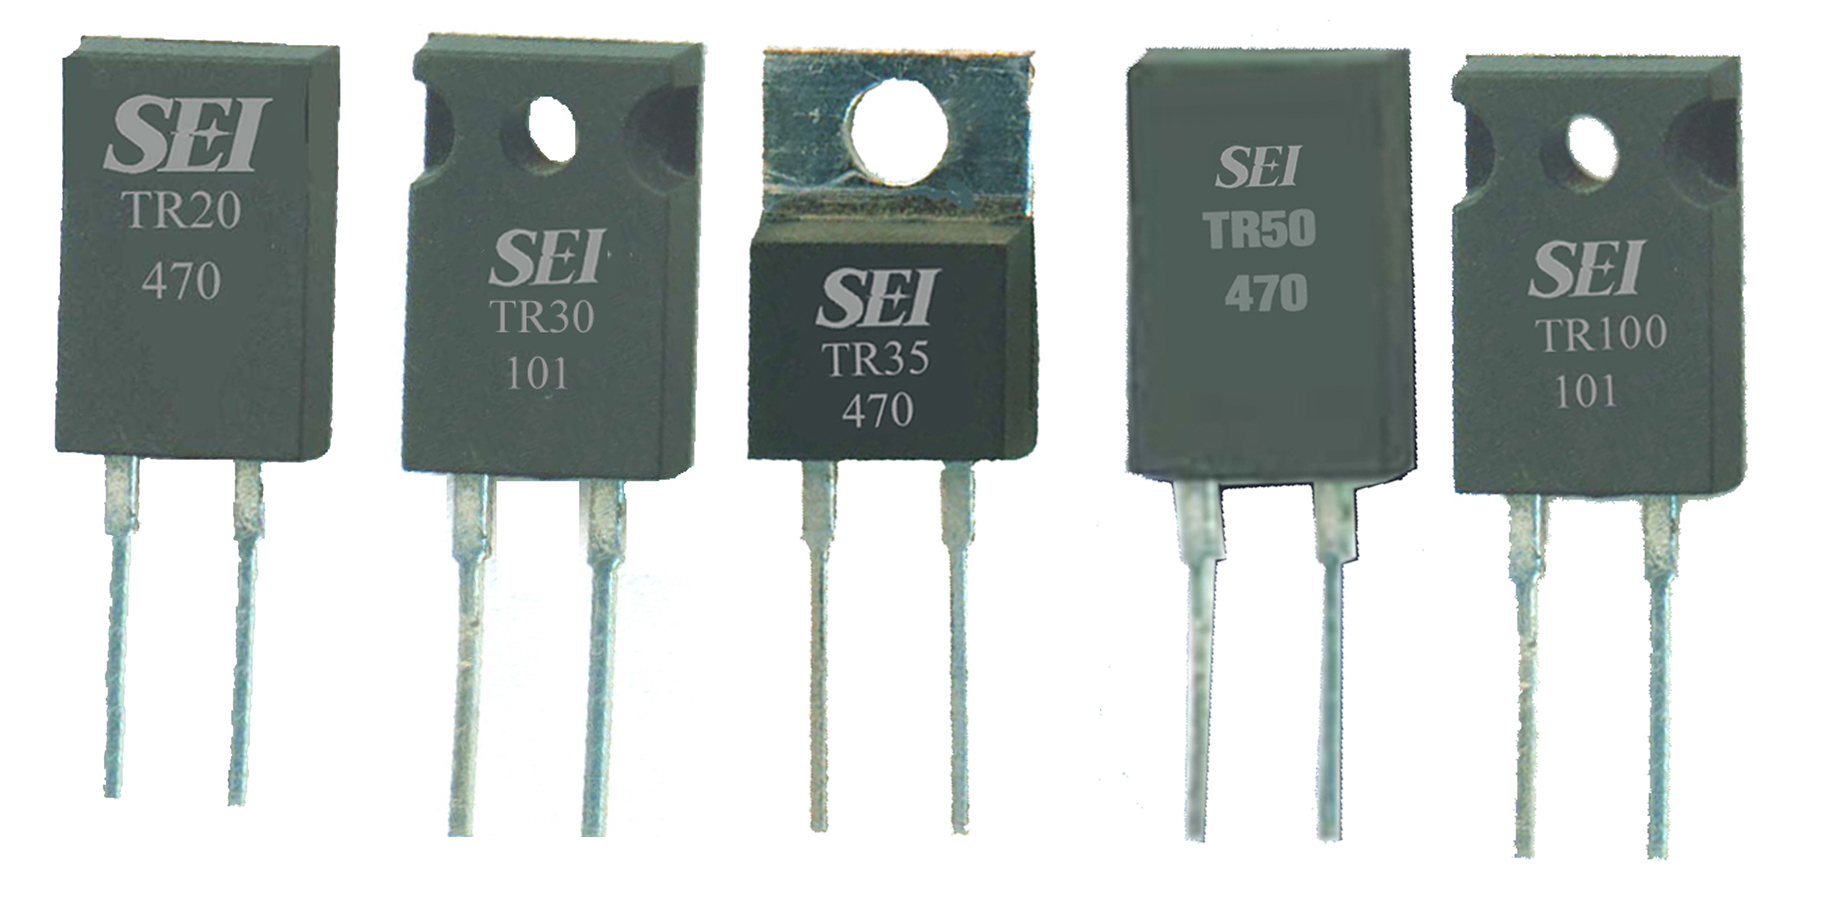 Power Resistors Offer up to 100W